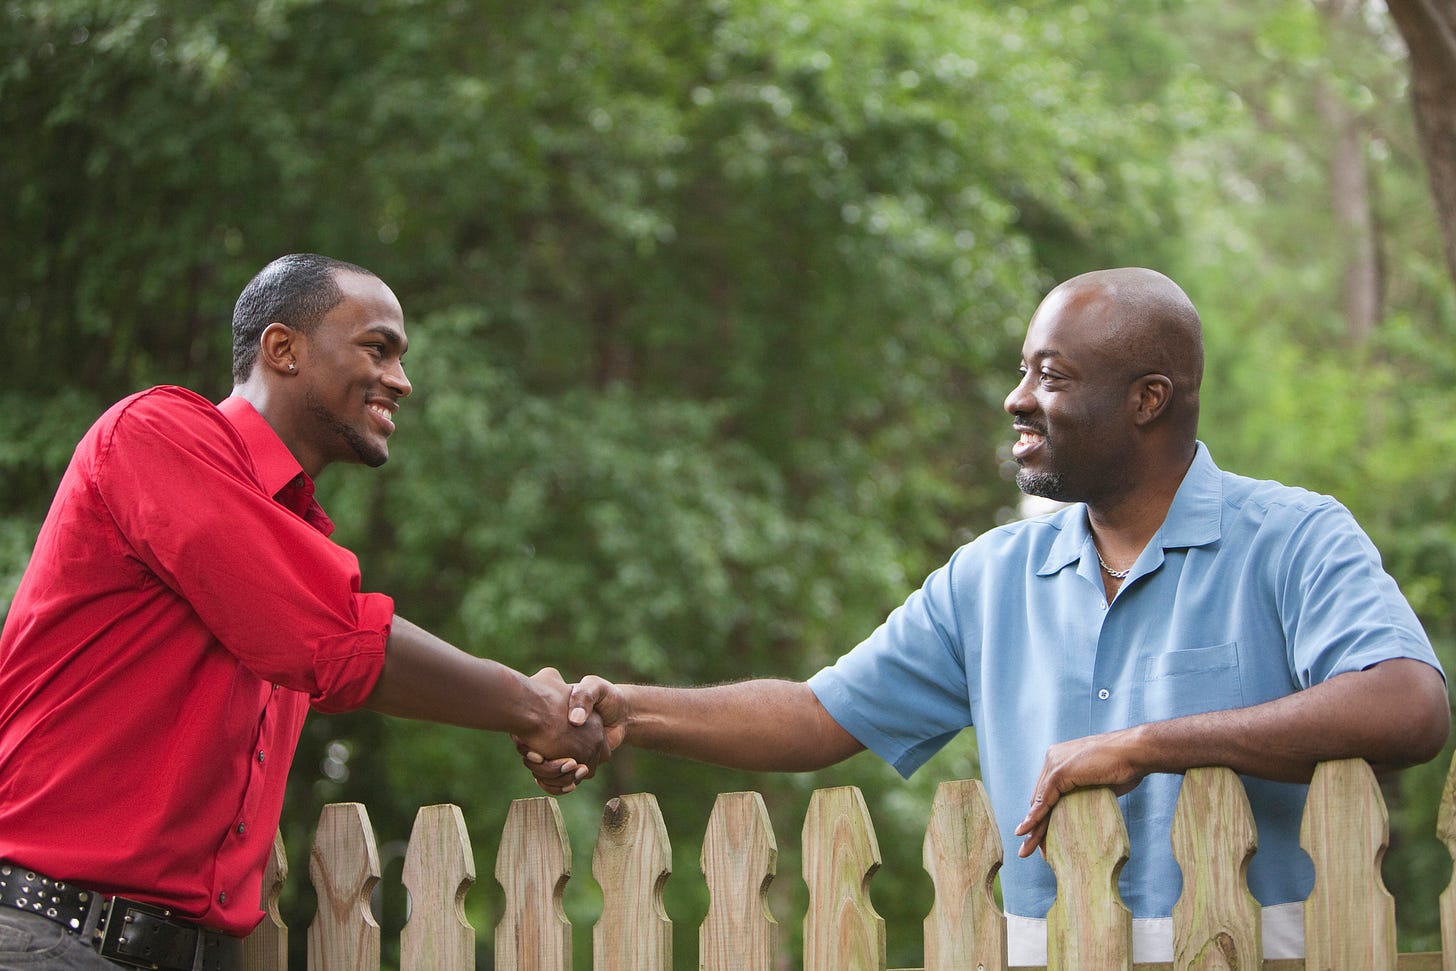 Two men shake hands over a fence.